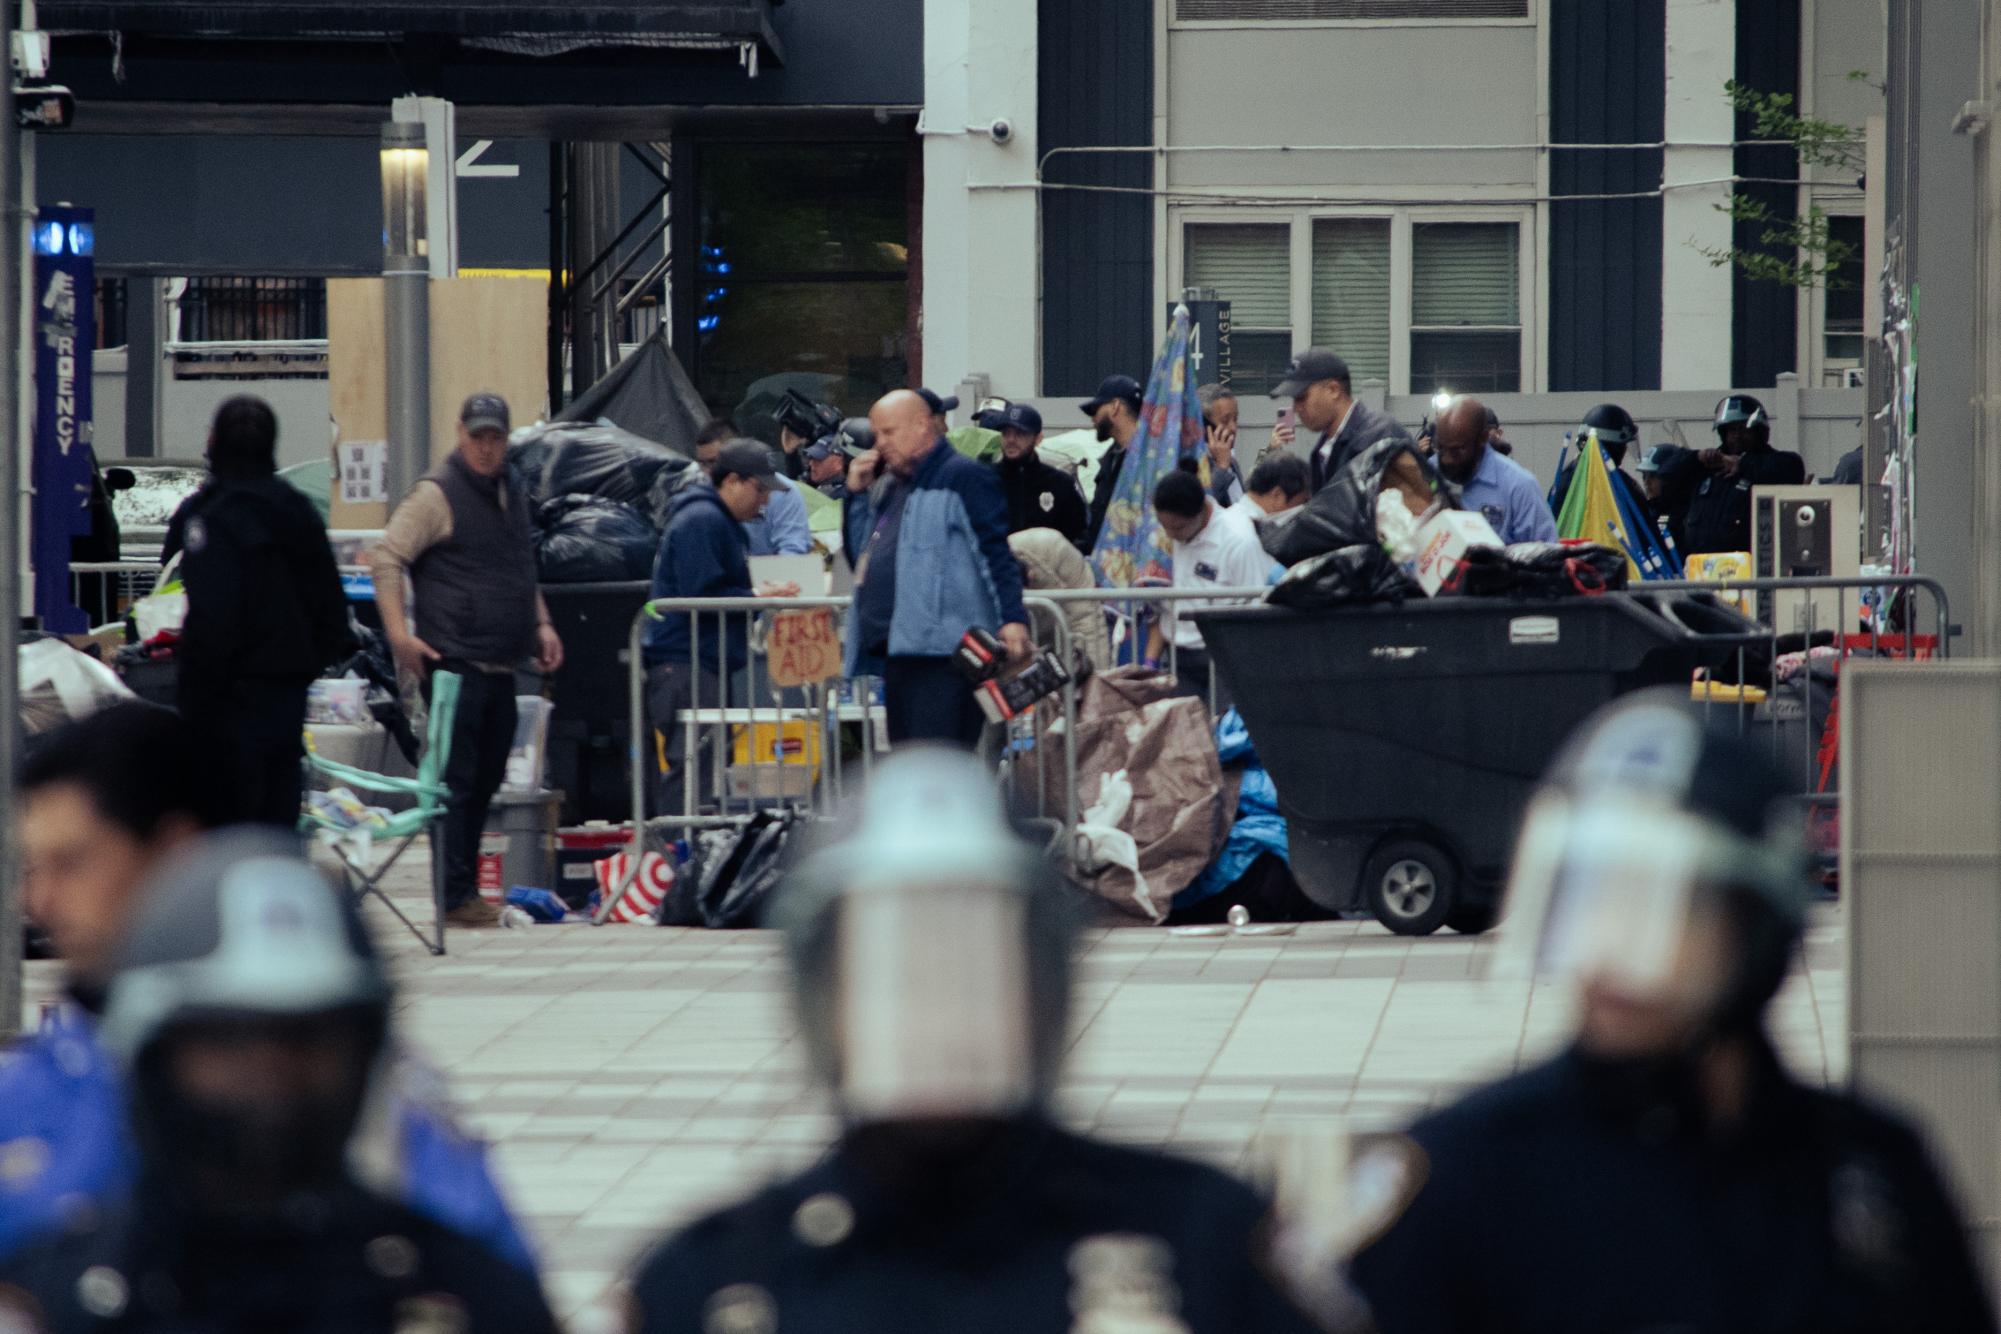 Three N.Y.P.D. officers in riot gear stand in the foreground. Cleaning staff clear out the encampment in the midground and media personnel set up cameras at the back.